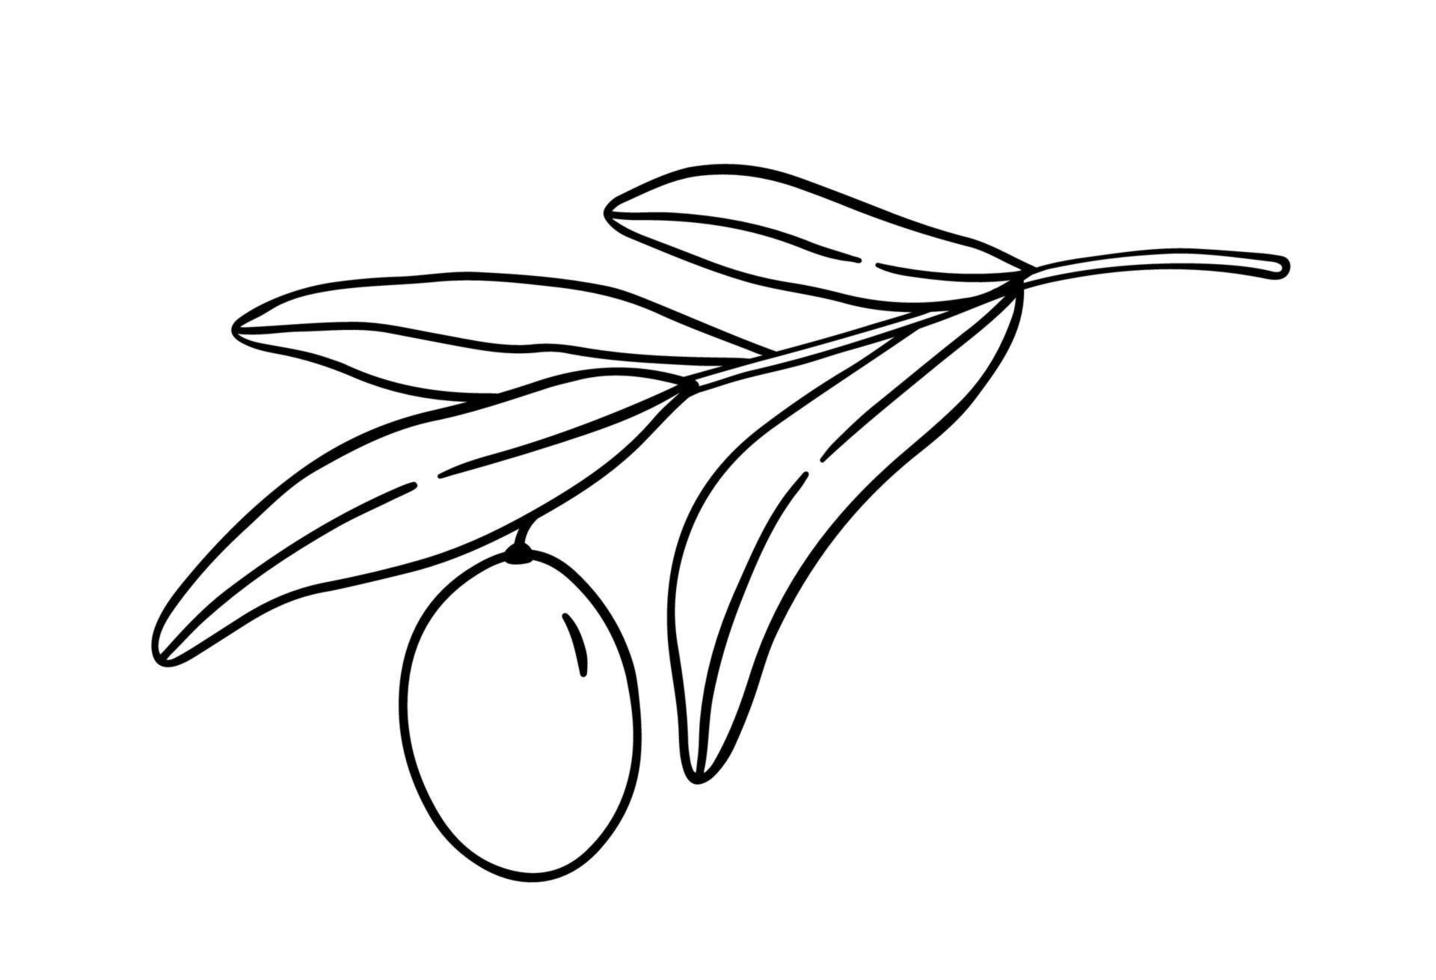 Outline olive branch with leaves isolated on white background vector